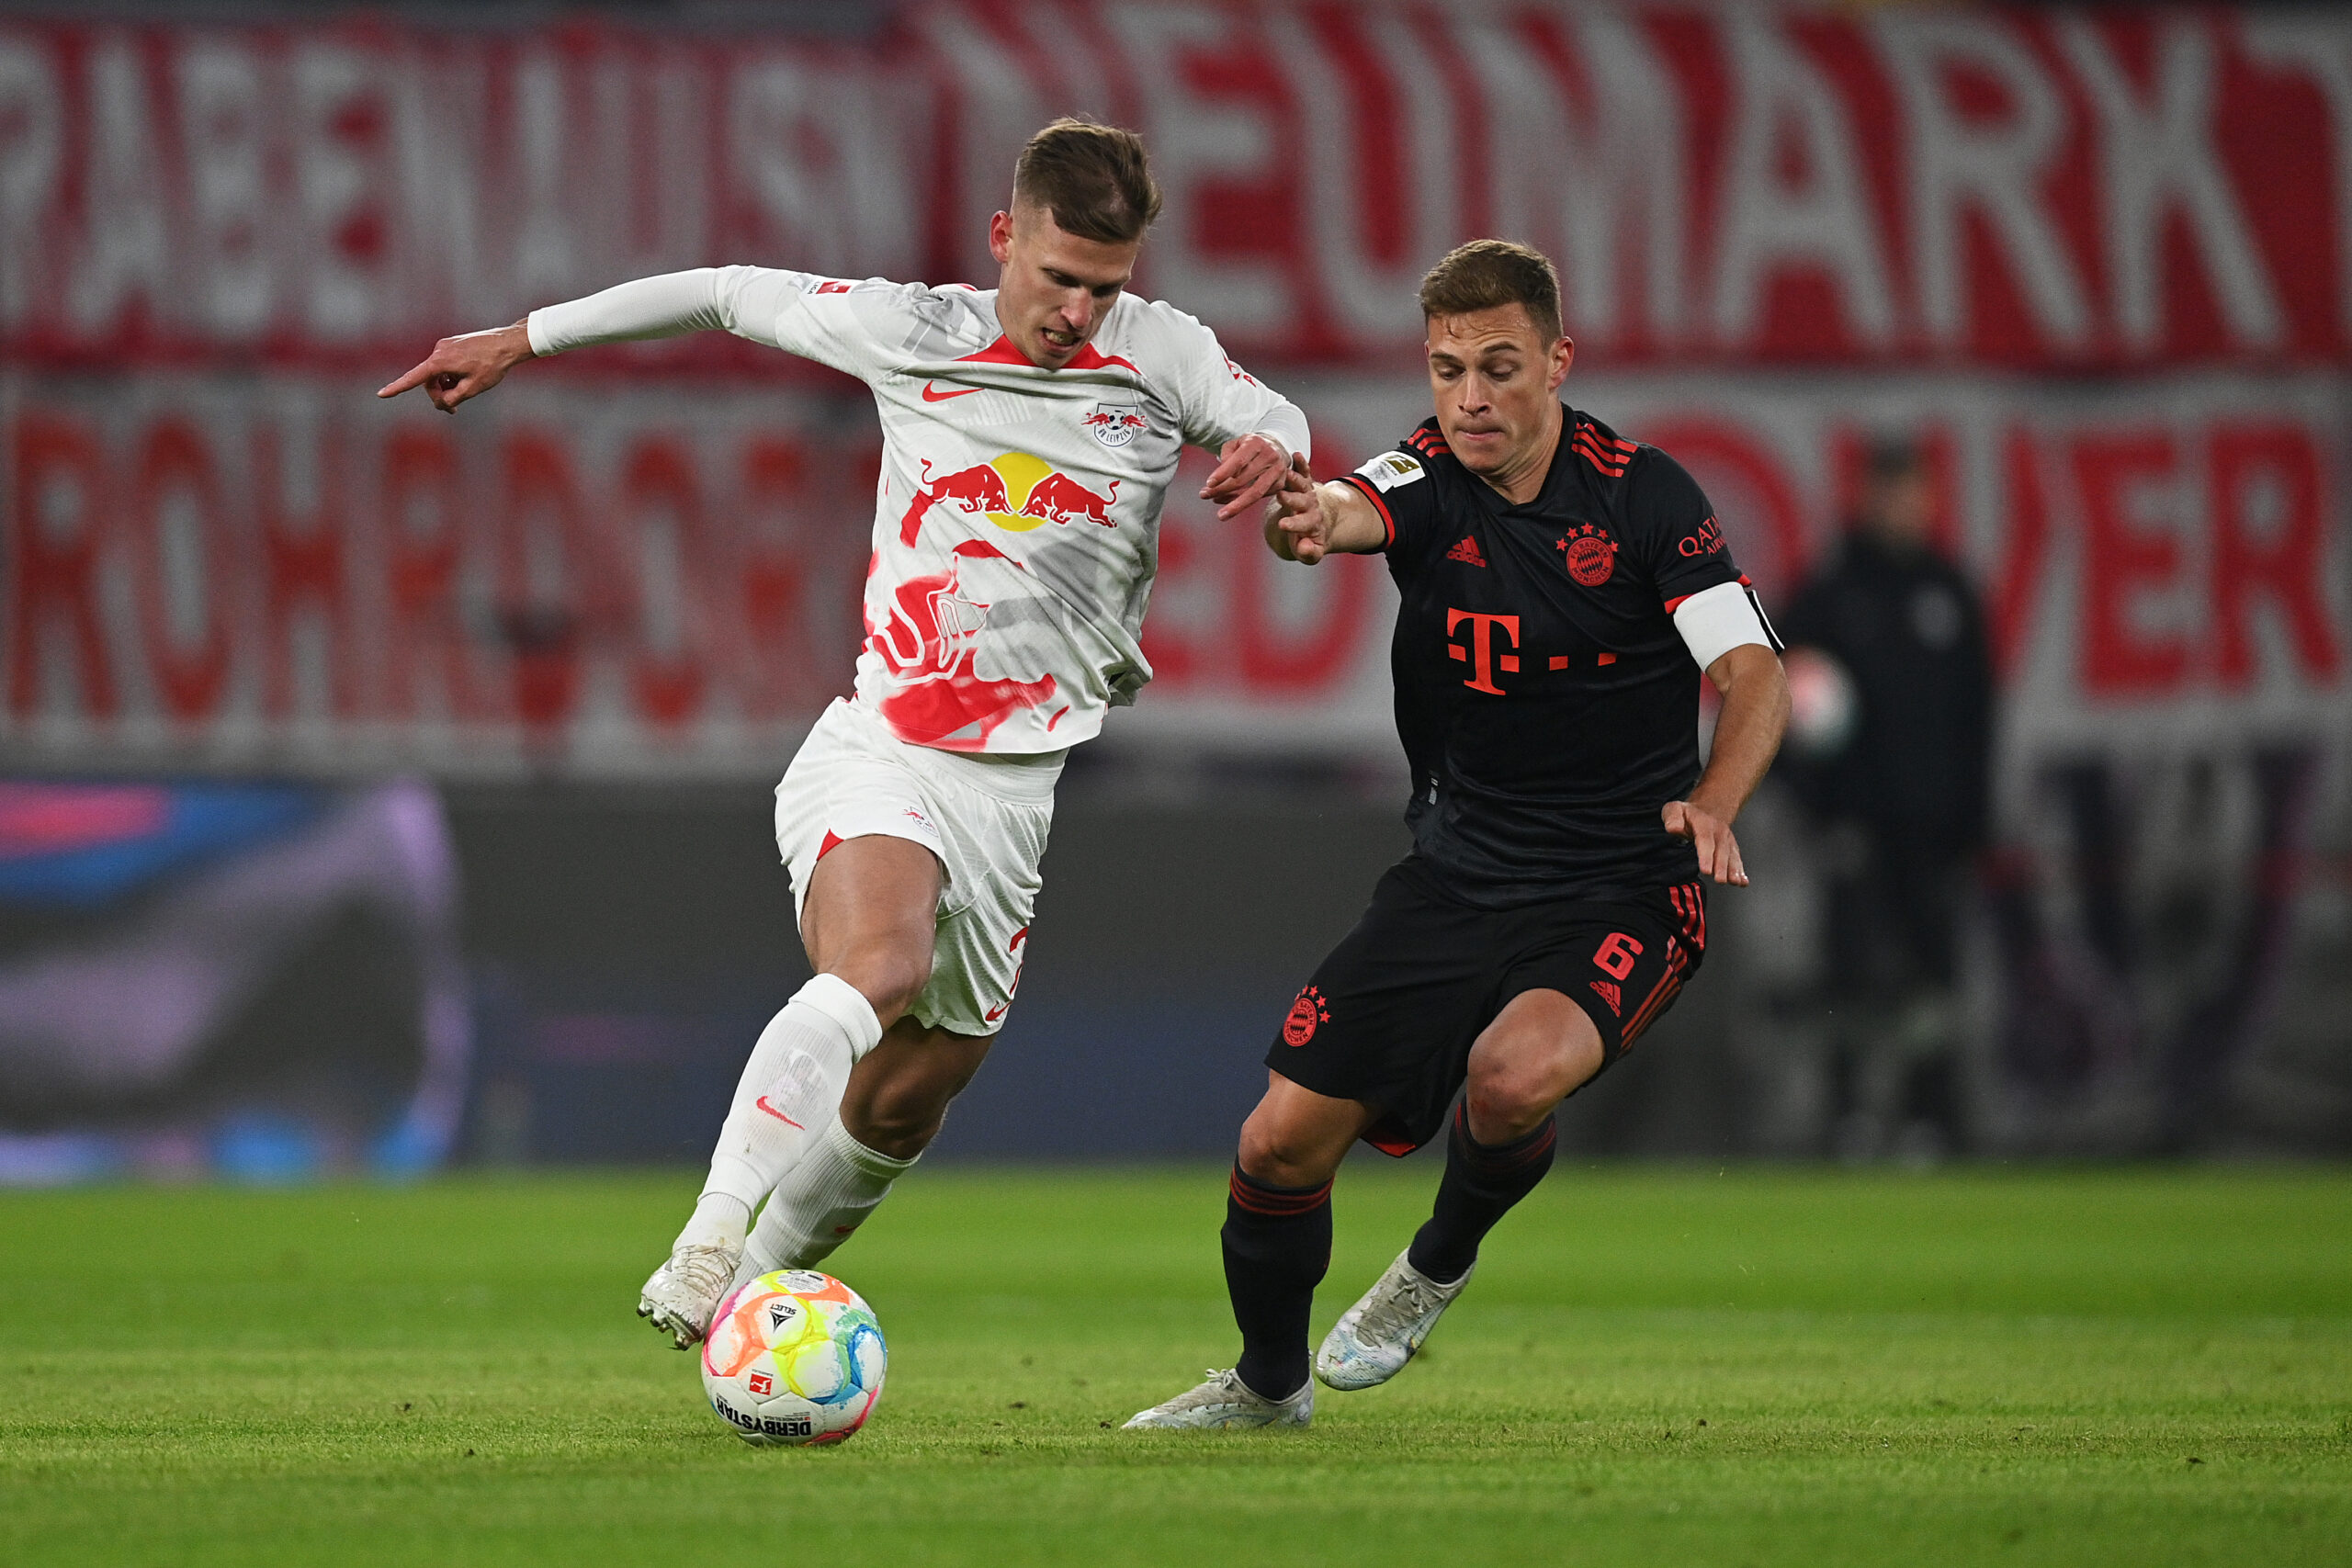 LEIPZIG, GERMANY - JANUARY 20: Dani Olmo of RB Leipzig battles for possession with Joshua Kimmich of Bayern Munich during the Bundesliga match between RB Leipzig and FC Bayern Muenchen at Red Bull Arena on January 20, 2023 in Leipzig, Germany.